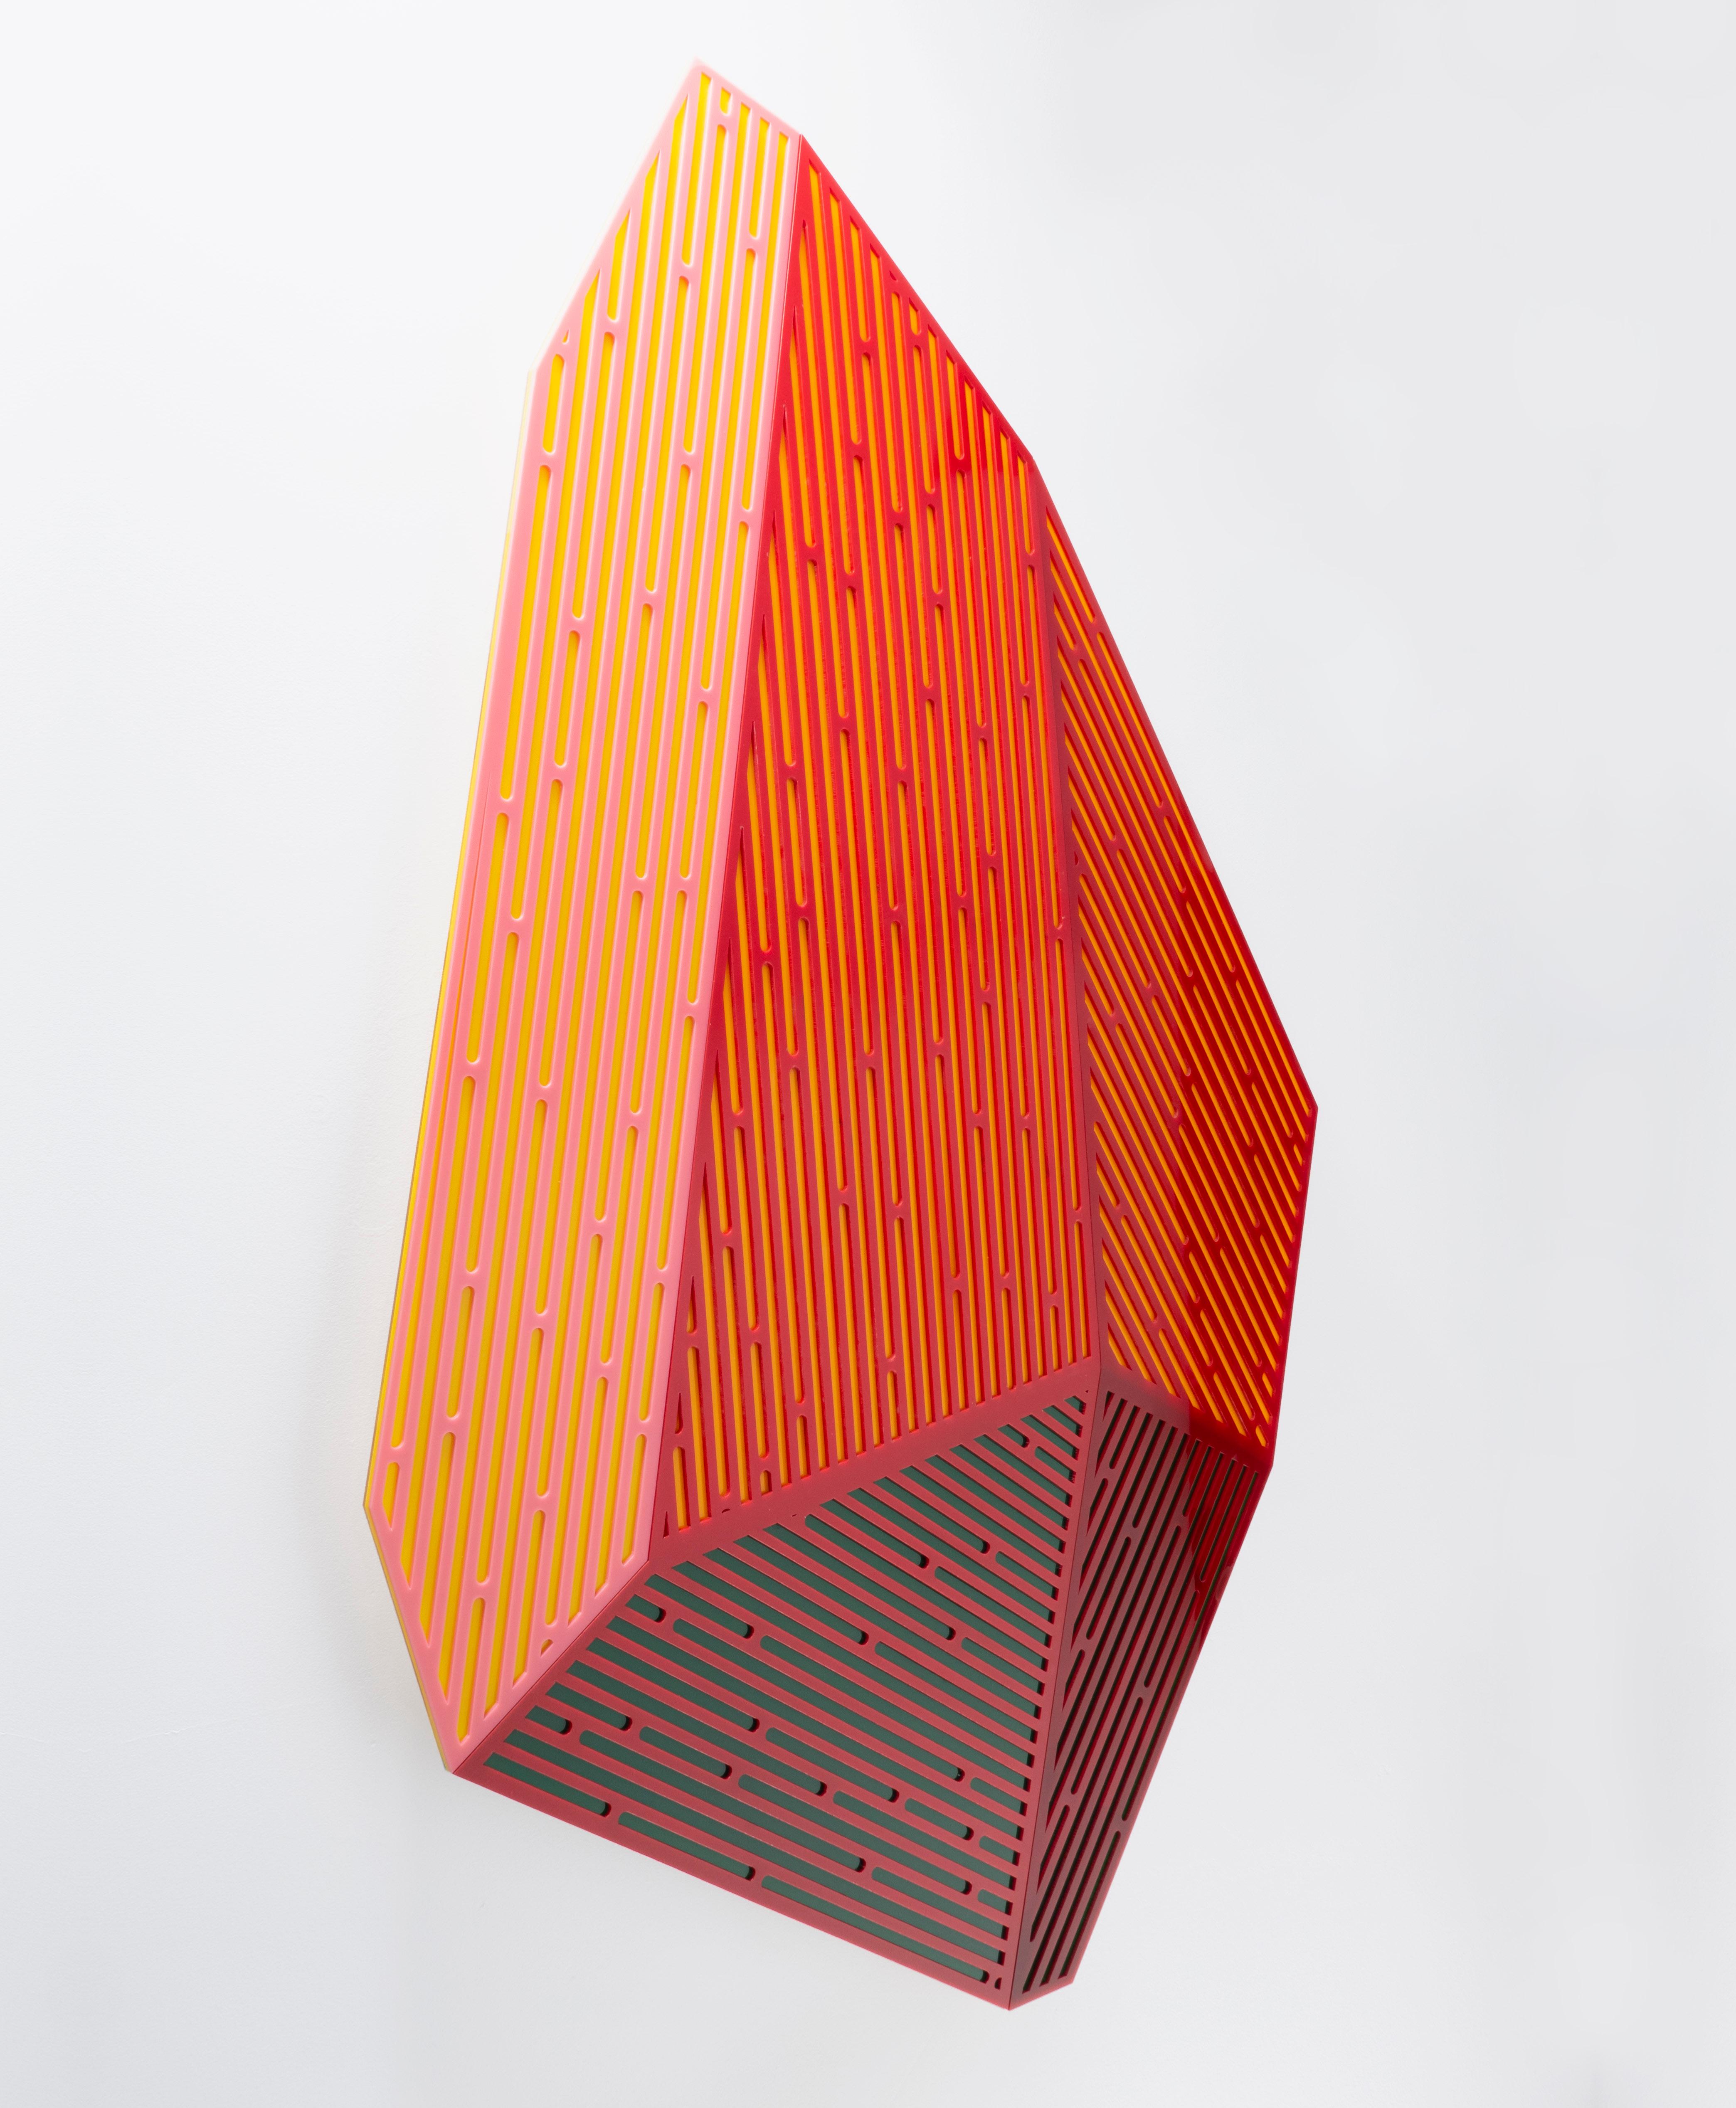 Prismatic Polygon IV: geometric abstract wall-mounted sculpture in red & orange - Abstract Sculpture by Jay Walker